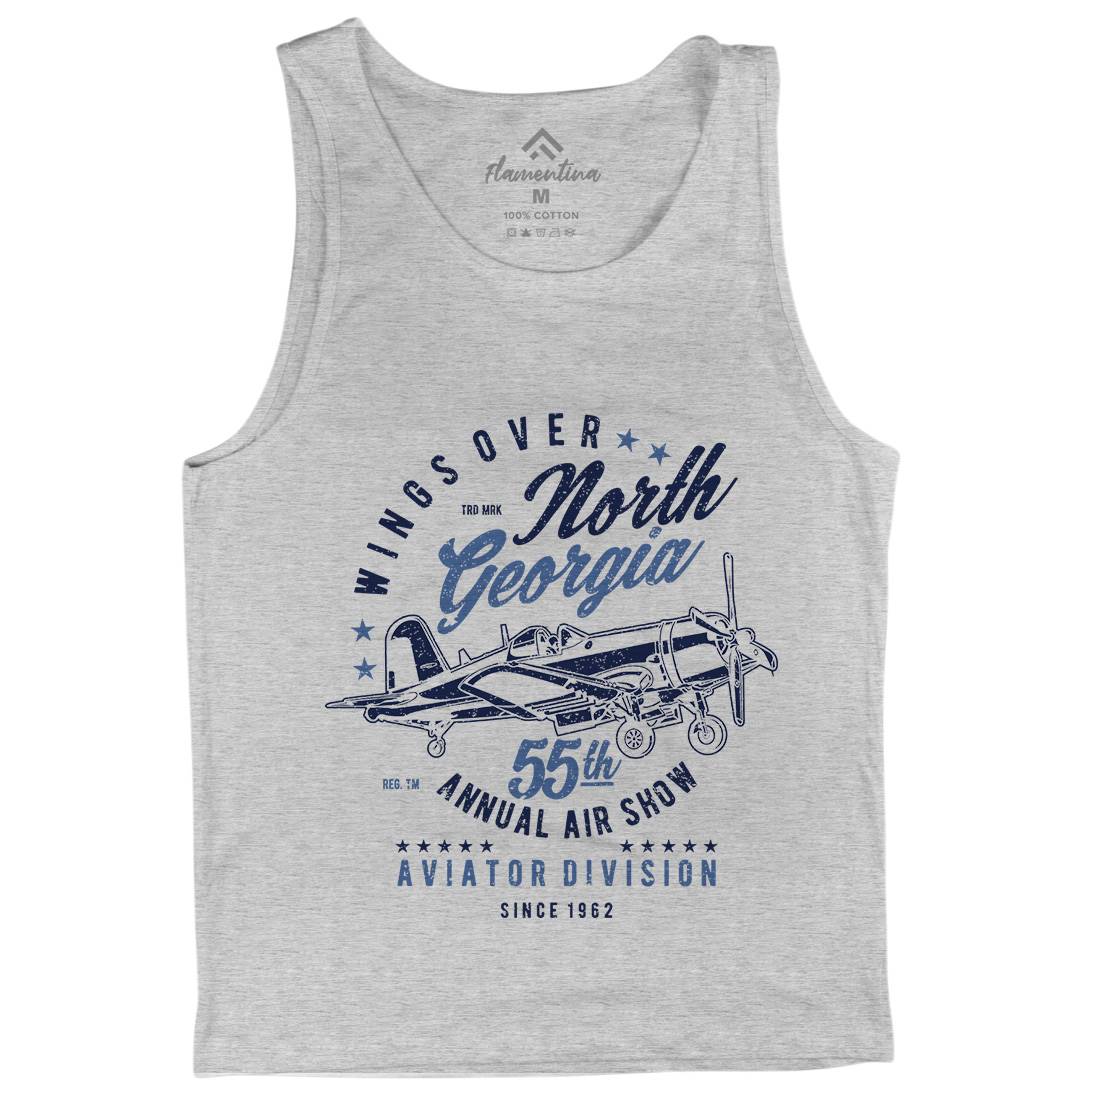 Wings Over North Georgia Mens Tank Top Vest Vehicles A796